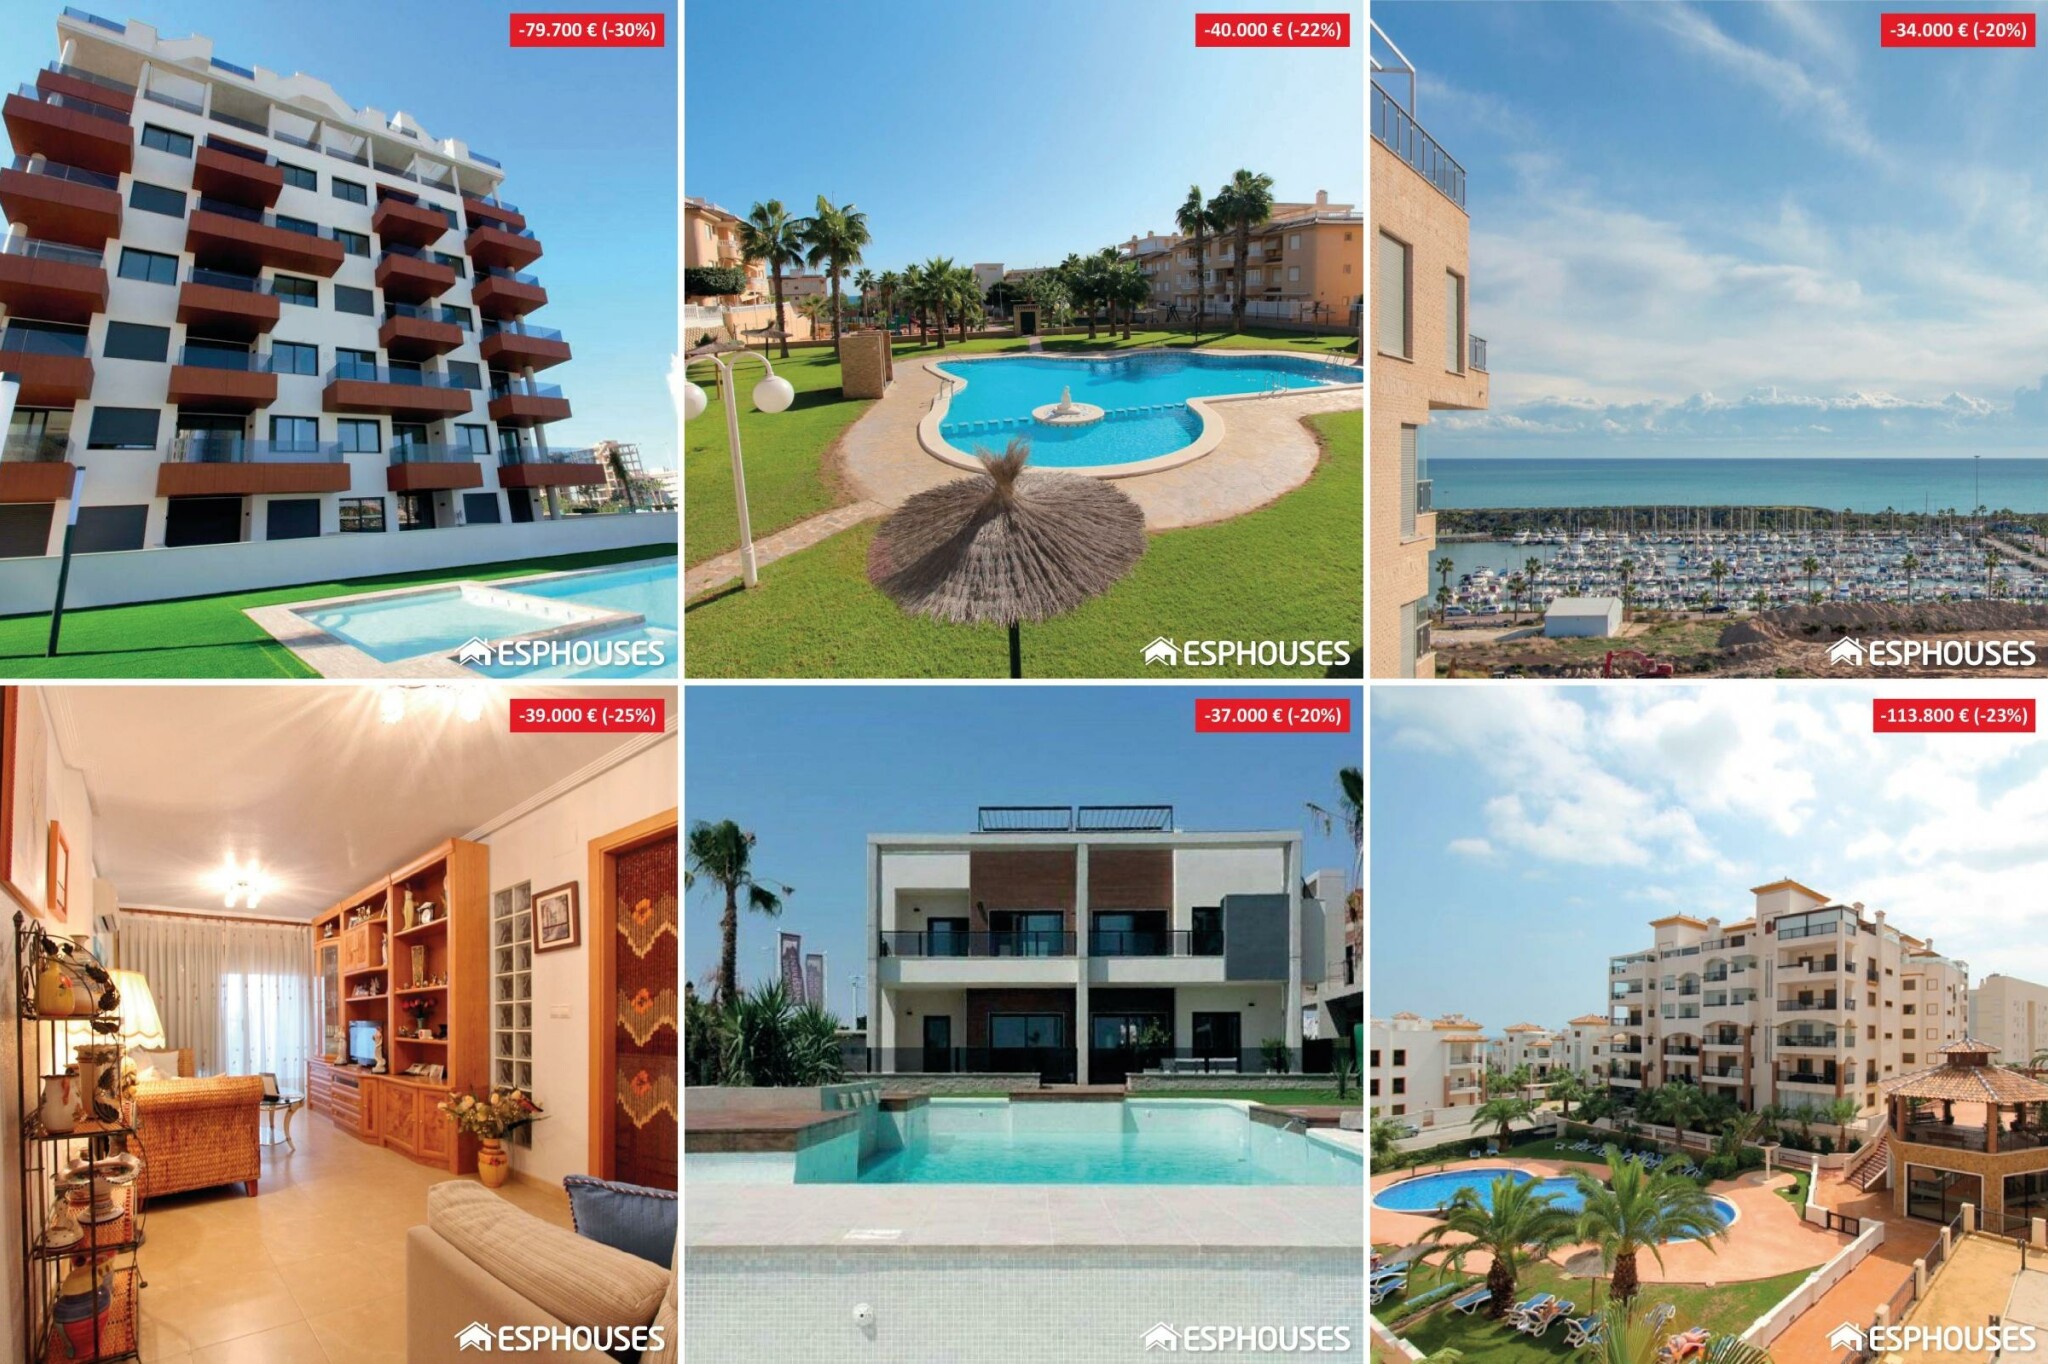 Apartments in Guardamar del Segura reduced by more than 20%.